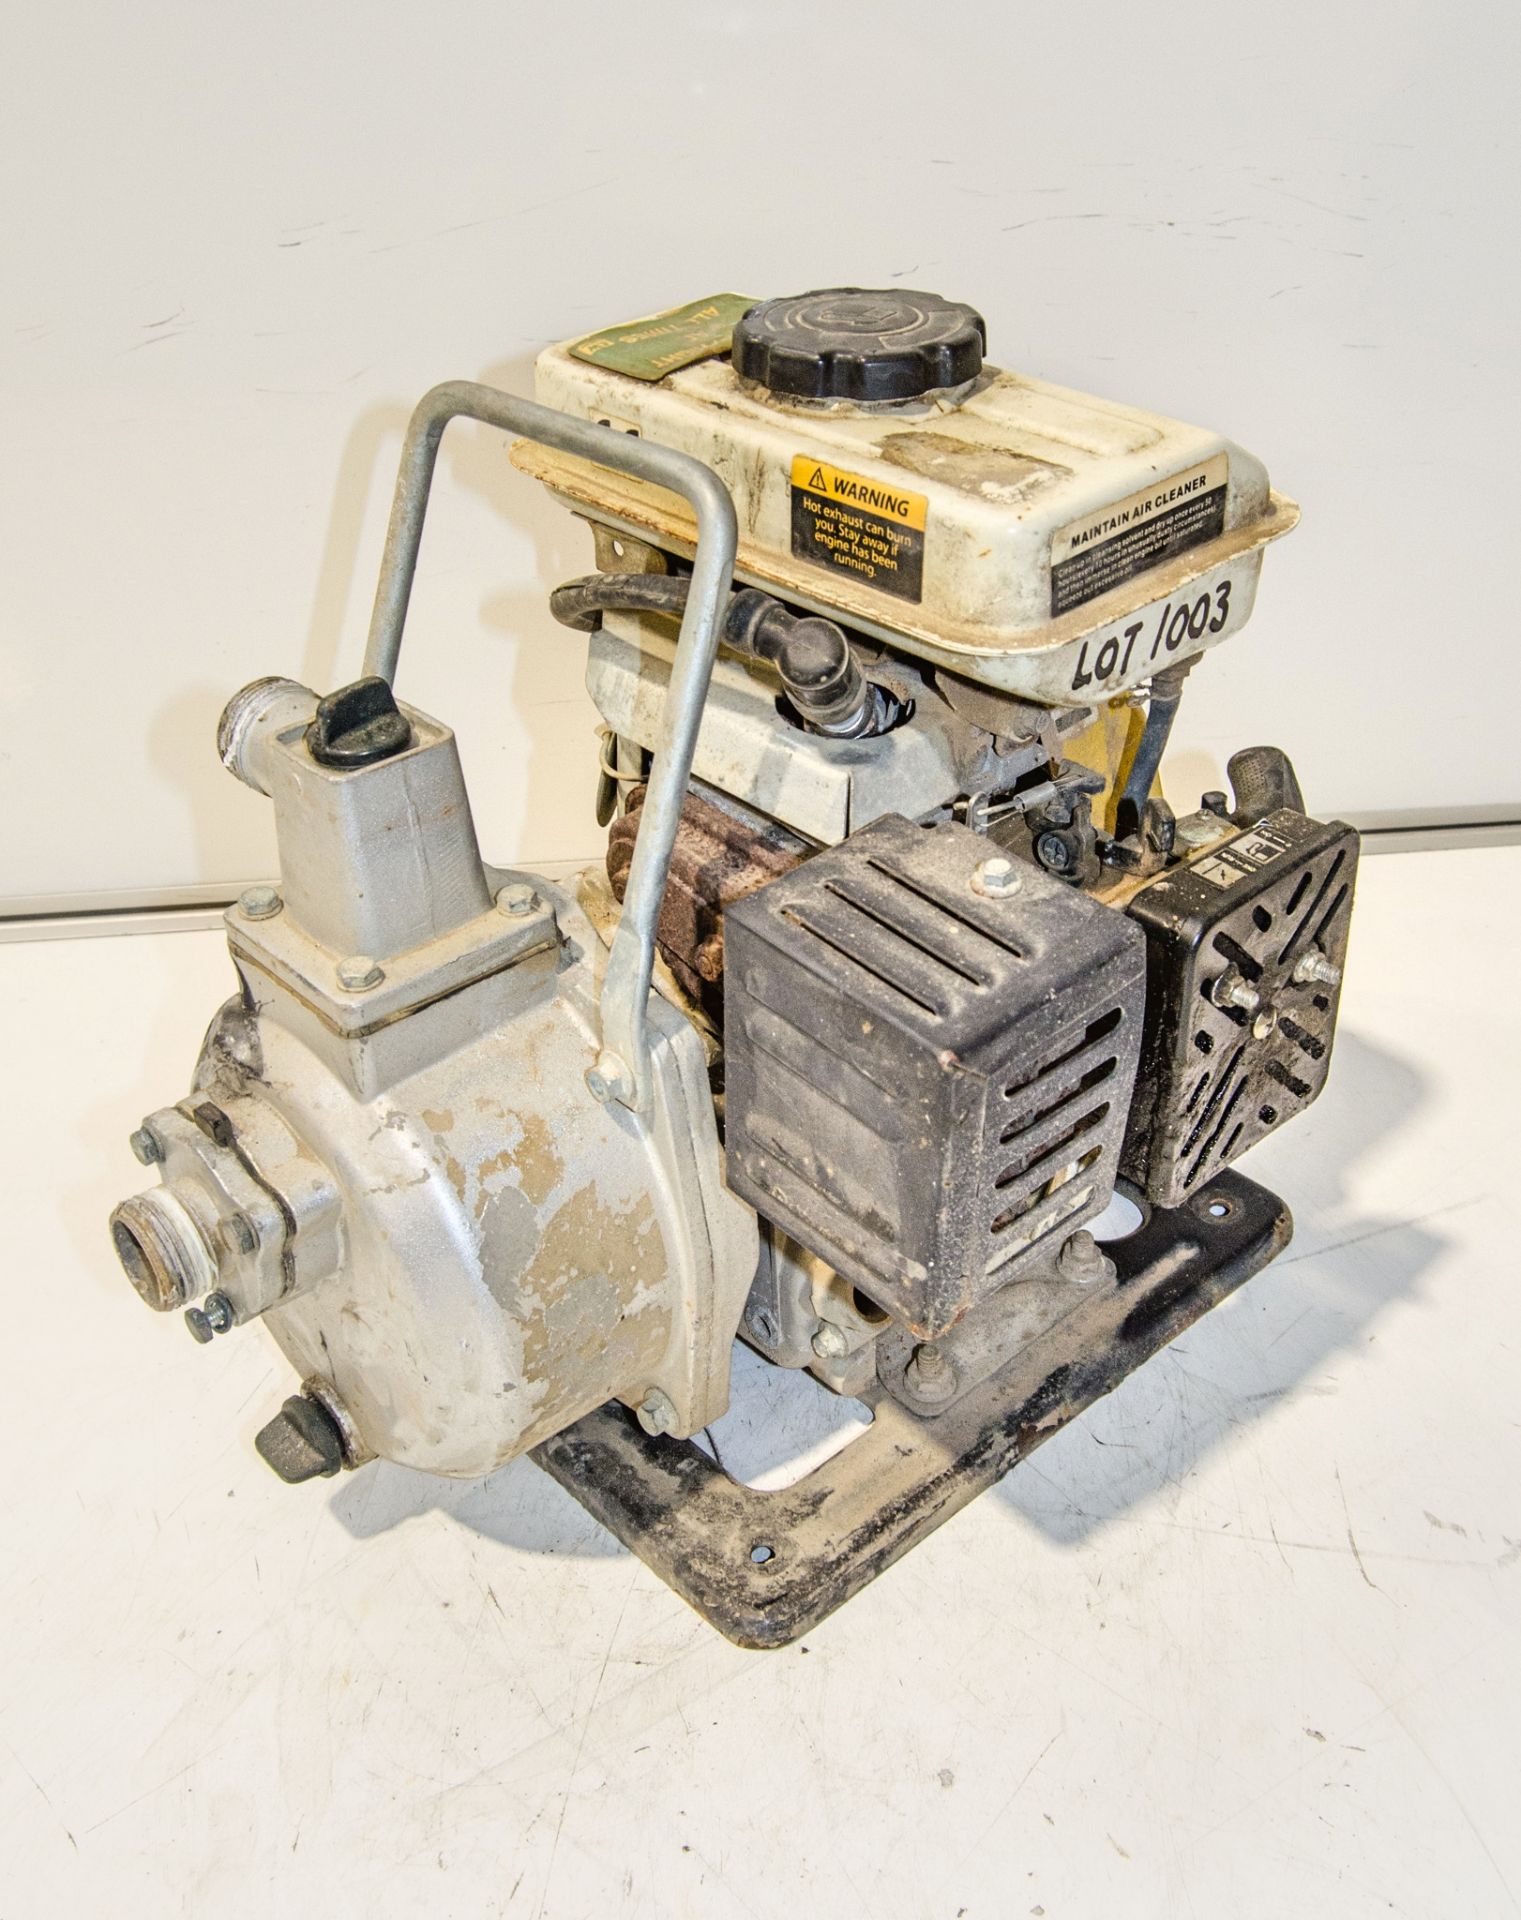 Petrol driven 1 inch water pump CW65453 - Image 2 of 2